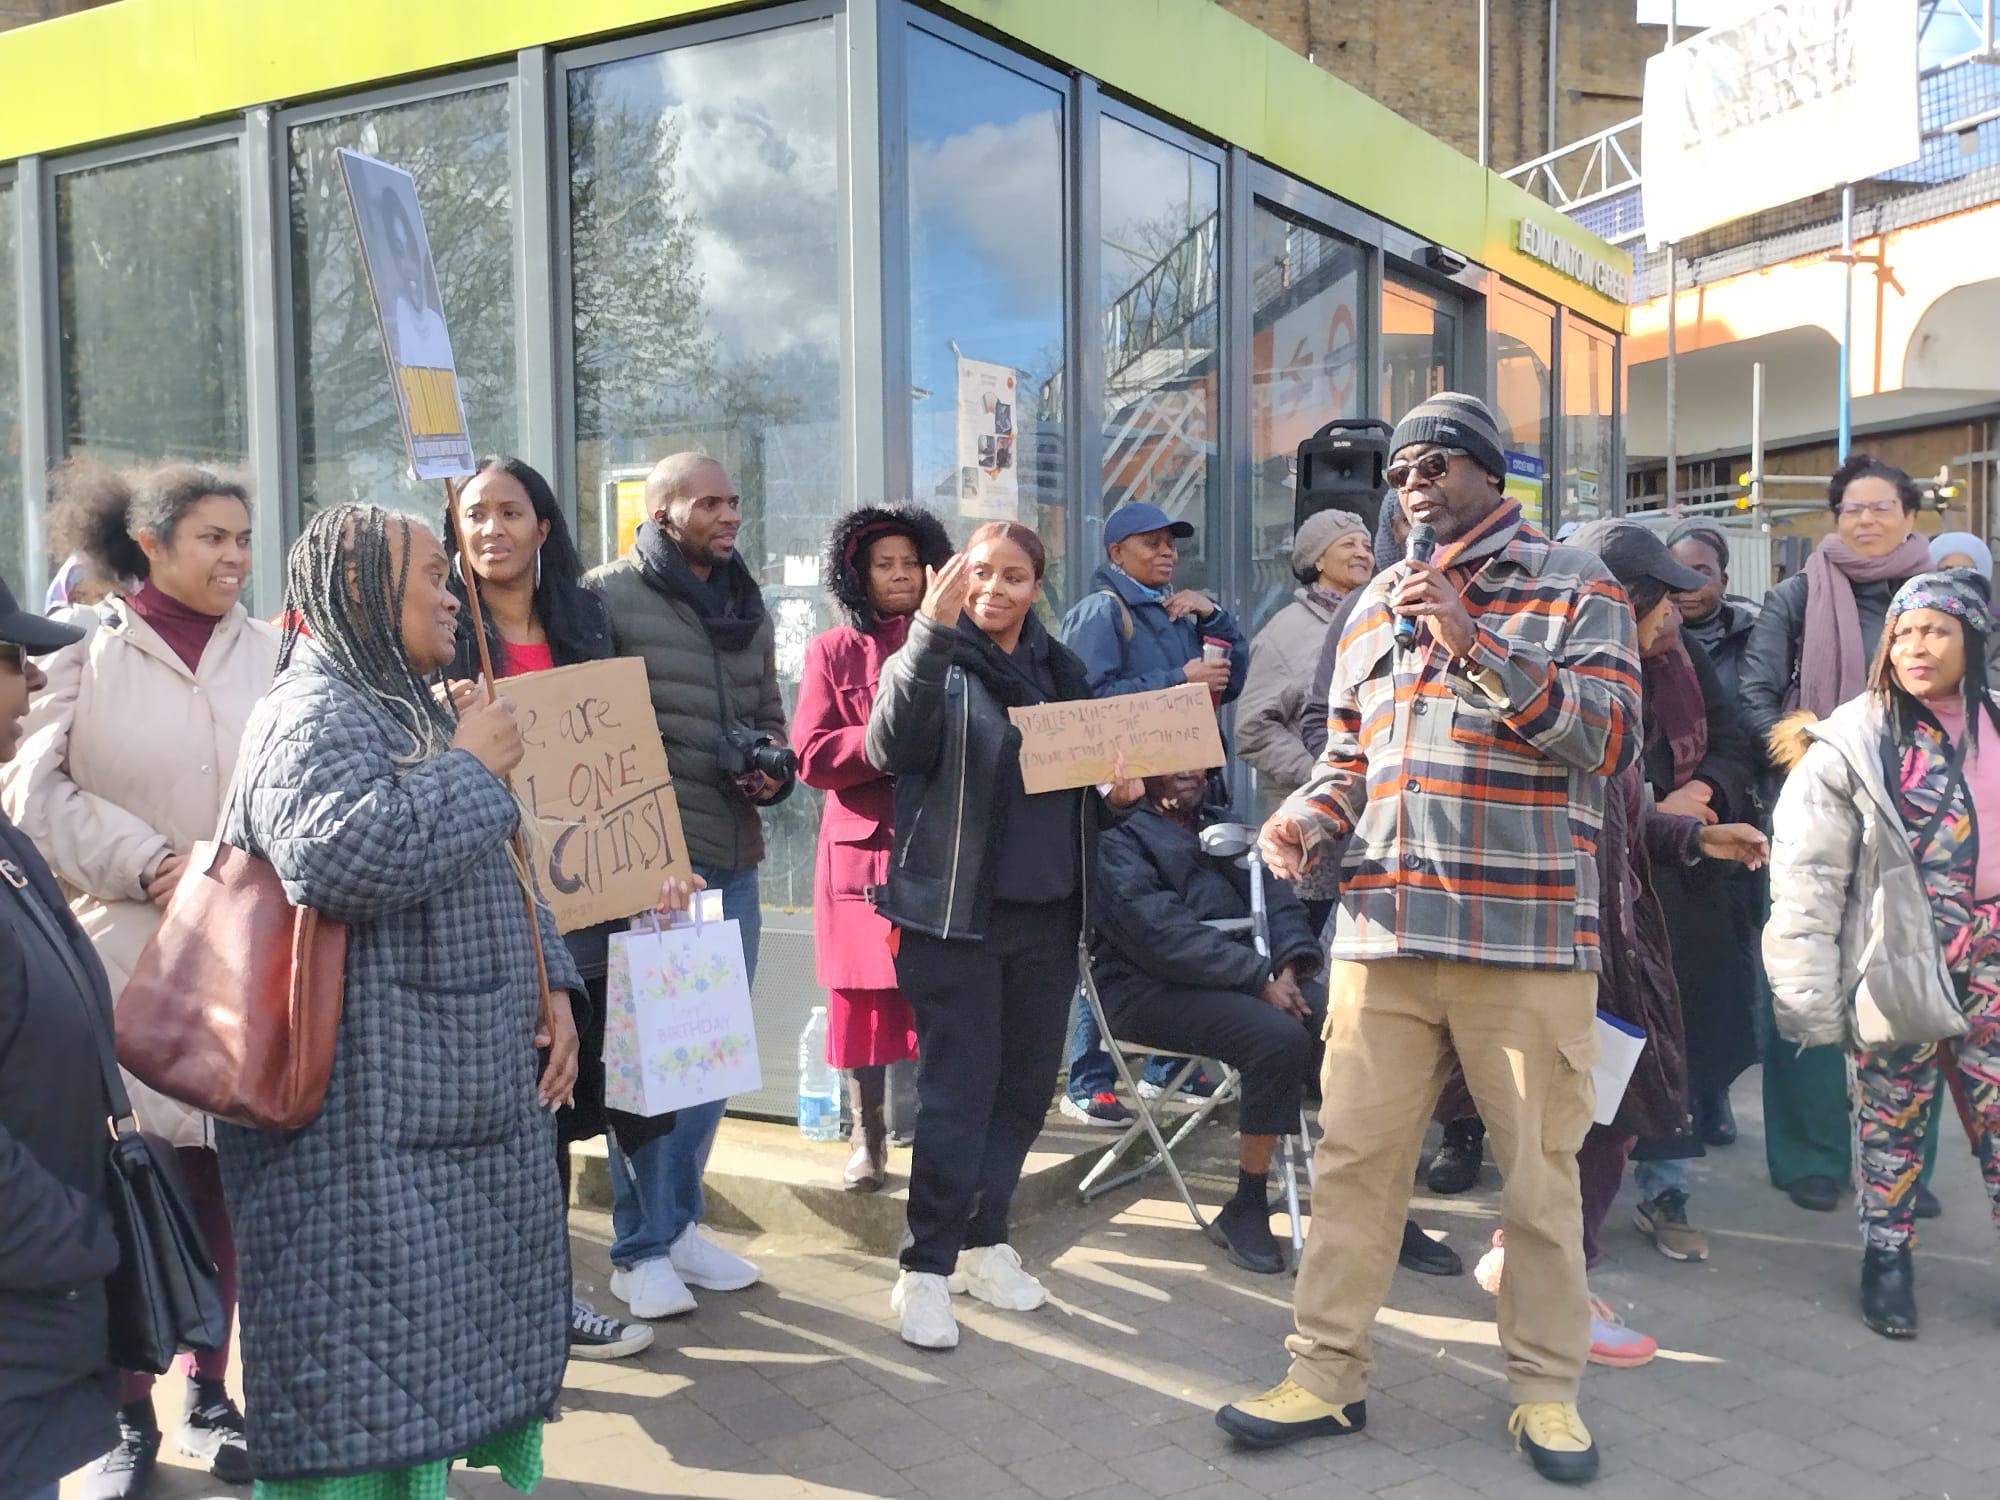 Enfield stands with Diane Abbott rally